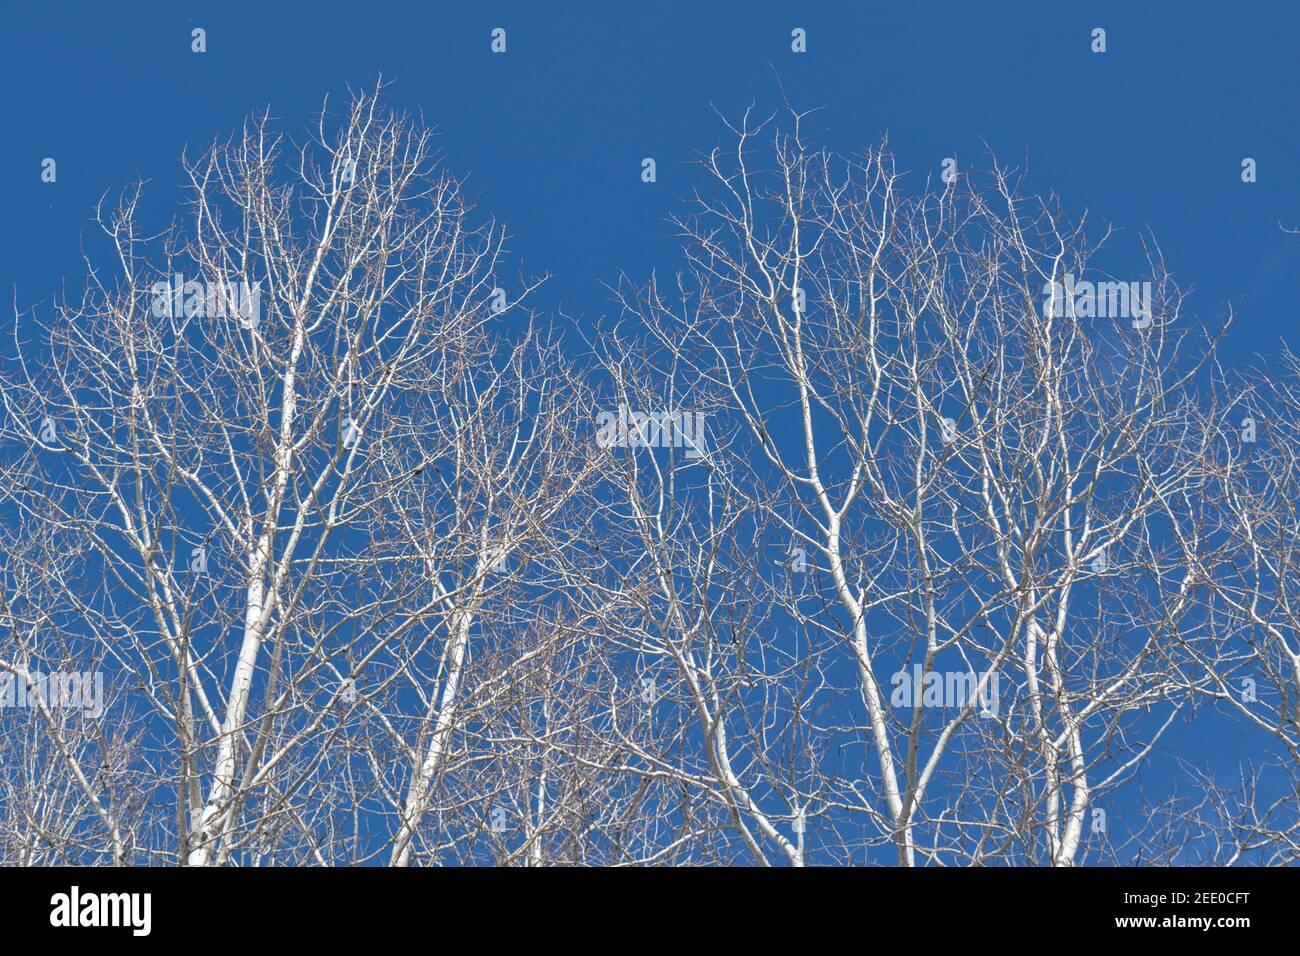 Bone white, leafless birch branches reach up into a clear blue winter sky in Ottawa, Ontario, Canada. Stock Photo